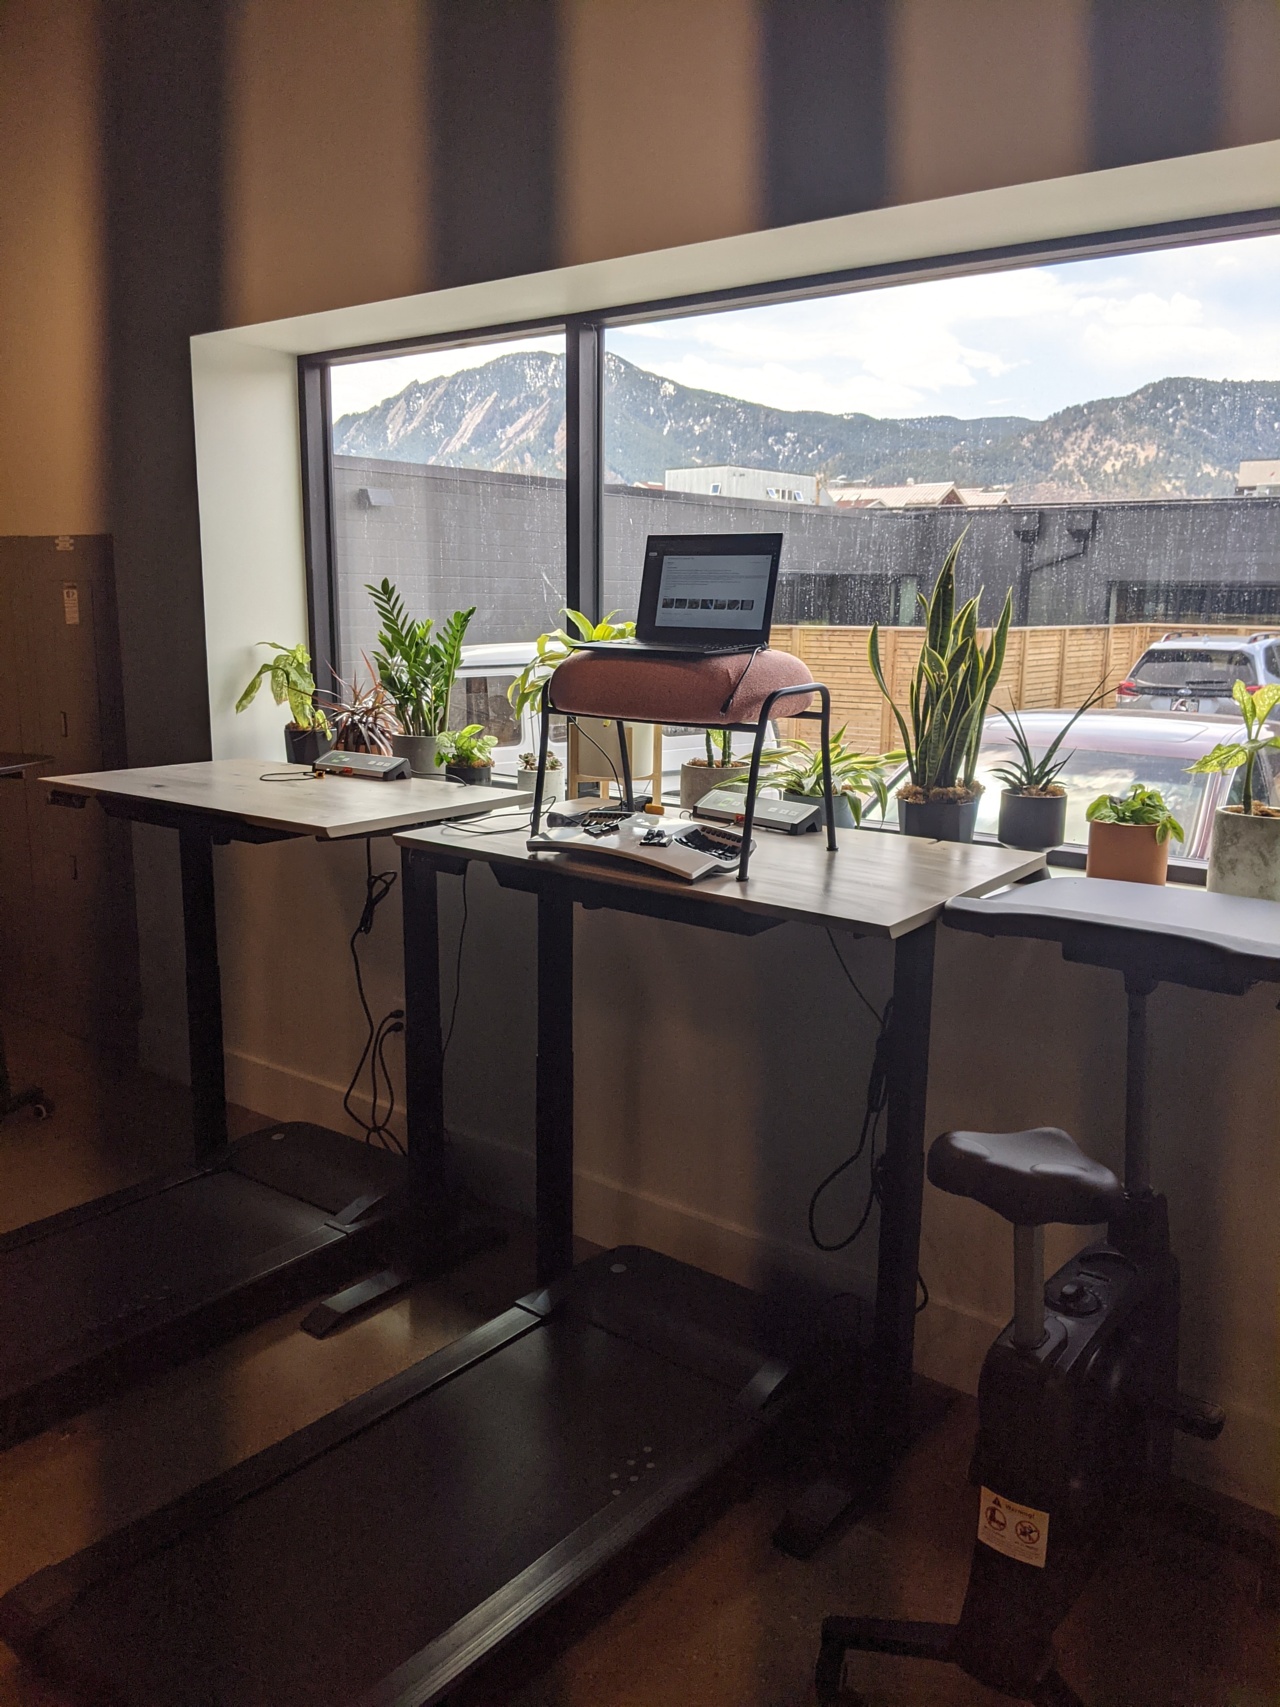 Treadmill desk with view of flatirons